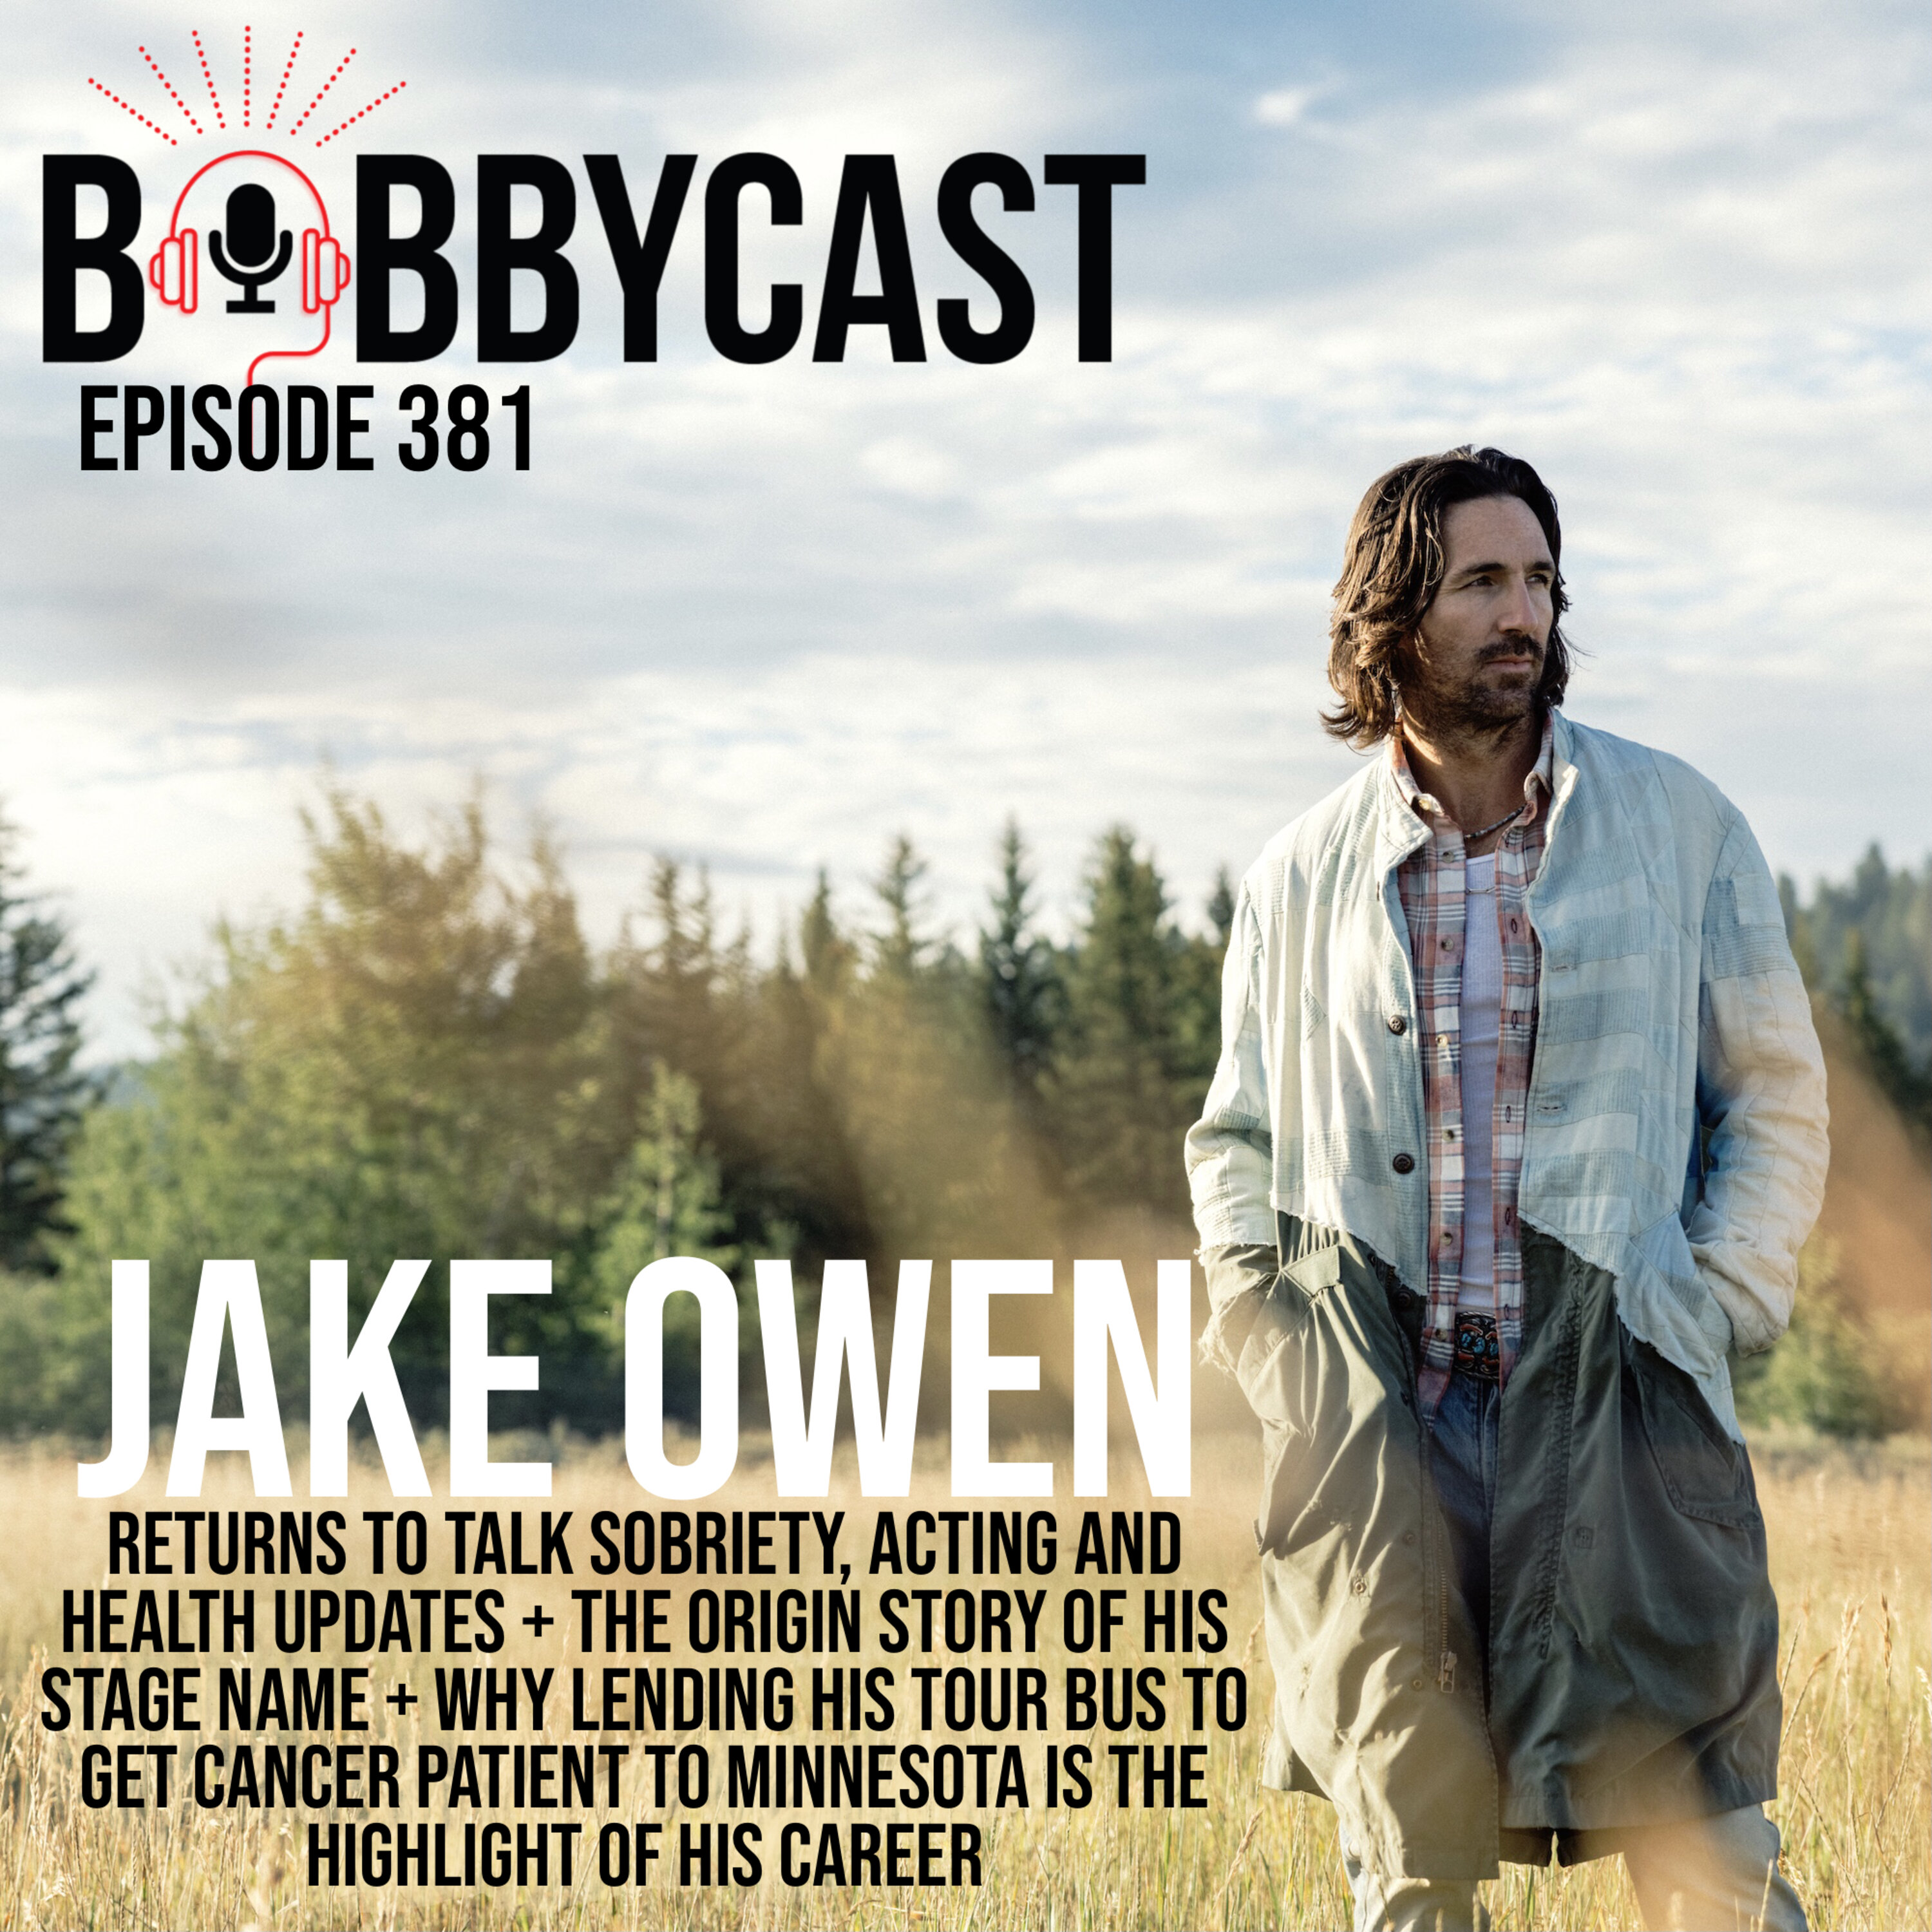 #381 - Jake Owen Returns to talk Sobriety, Acting and Health Updates + The Origin Story of His Stage Name + Why Lending His Tour Bus to Get Cancer Patient to Minnesota Is The Highlight of His Career